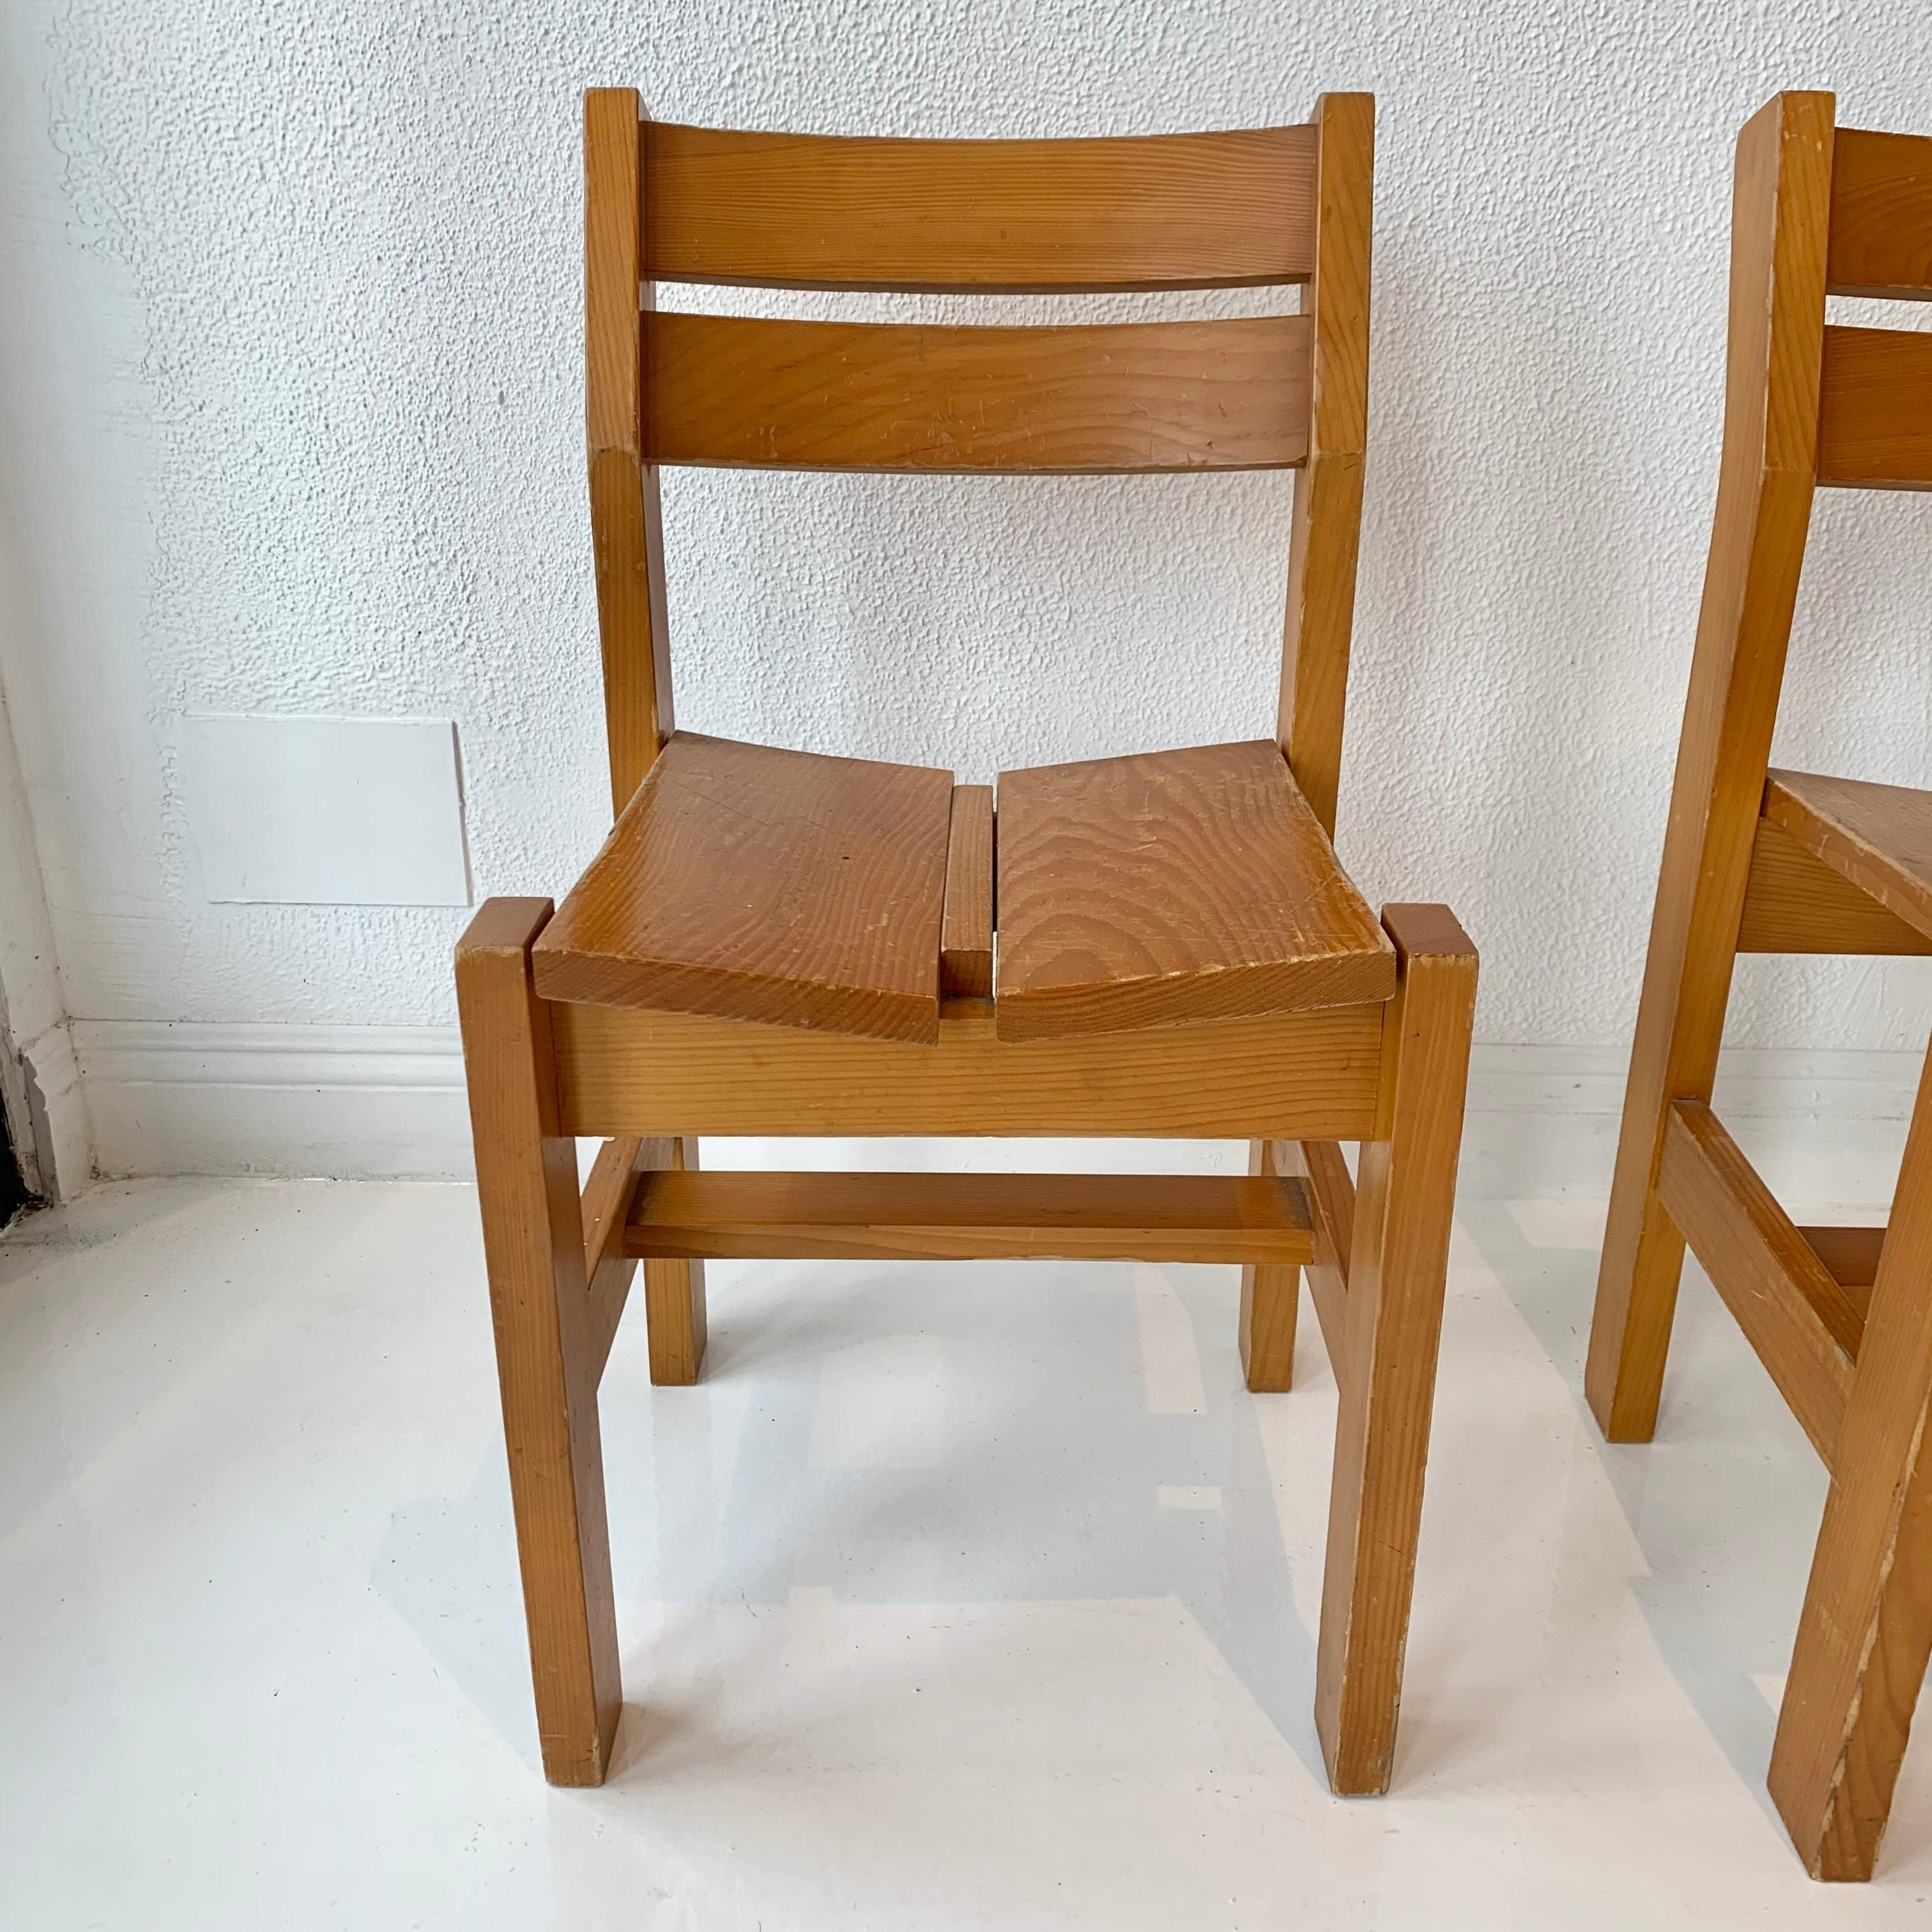 Charlotte Perriand Chairs from 